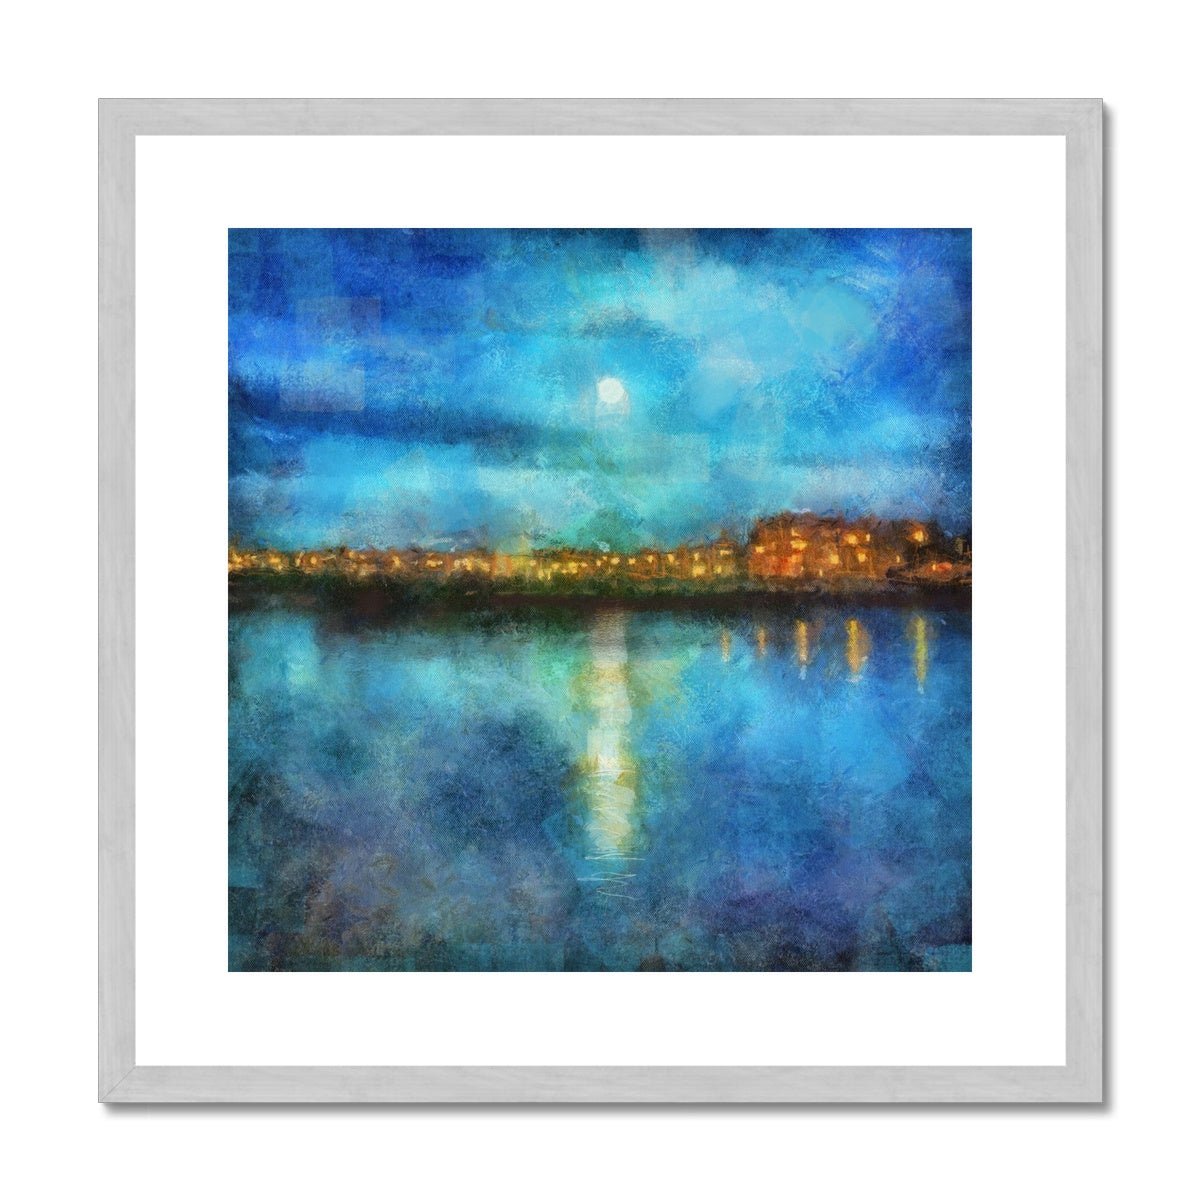 Portobello Moonlight Edinburgh Painting | Antique Framed & Mounted Prints From Scotland-Antique Framed & Mounted Prints-Edinburgh & Glasgow Art Gallery-20"x20"-Silver Frame-Paintings, Prints, Homeware, Art Gifts From Scotland By Scottish Artist Kevin Hunter